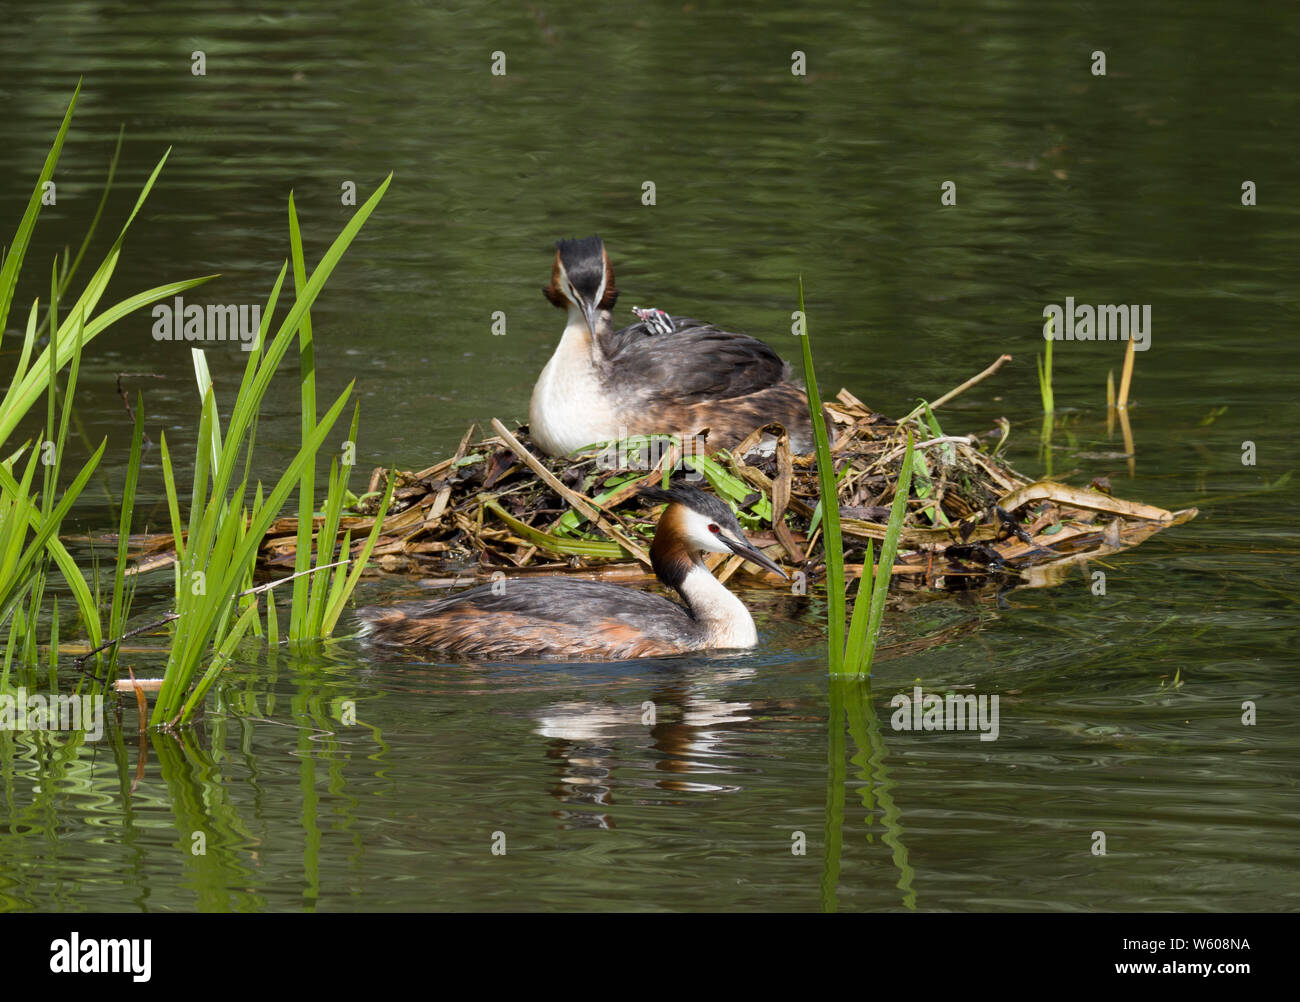 Great-crested Grebe, Podiceps cristatus, two adults at the nest with young chick, Lea Valley, Essex, UK. Stock Photo